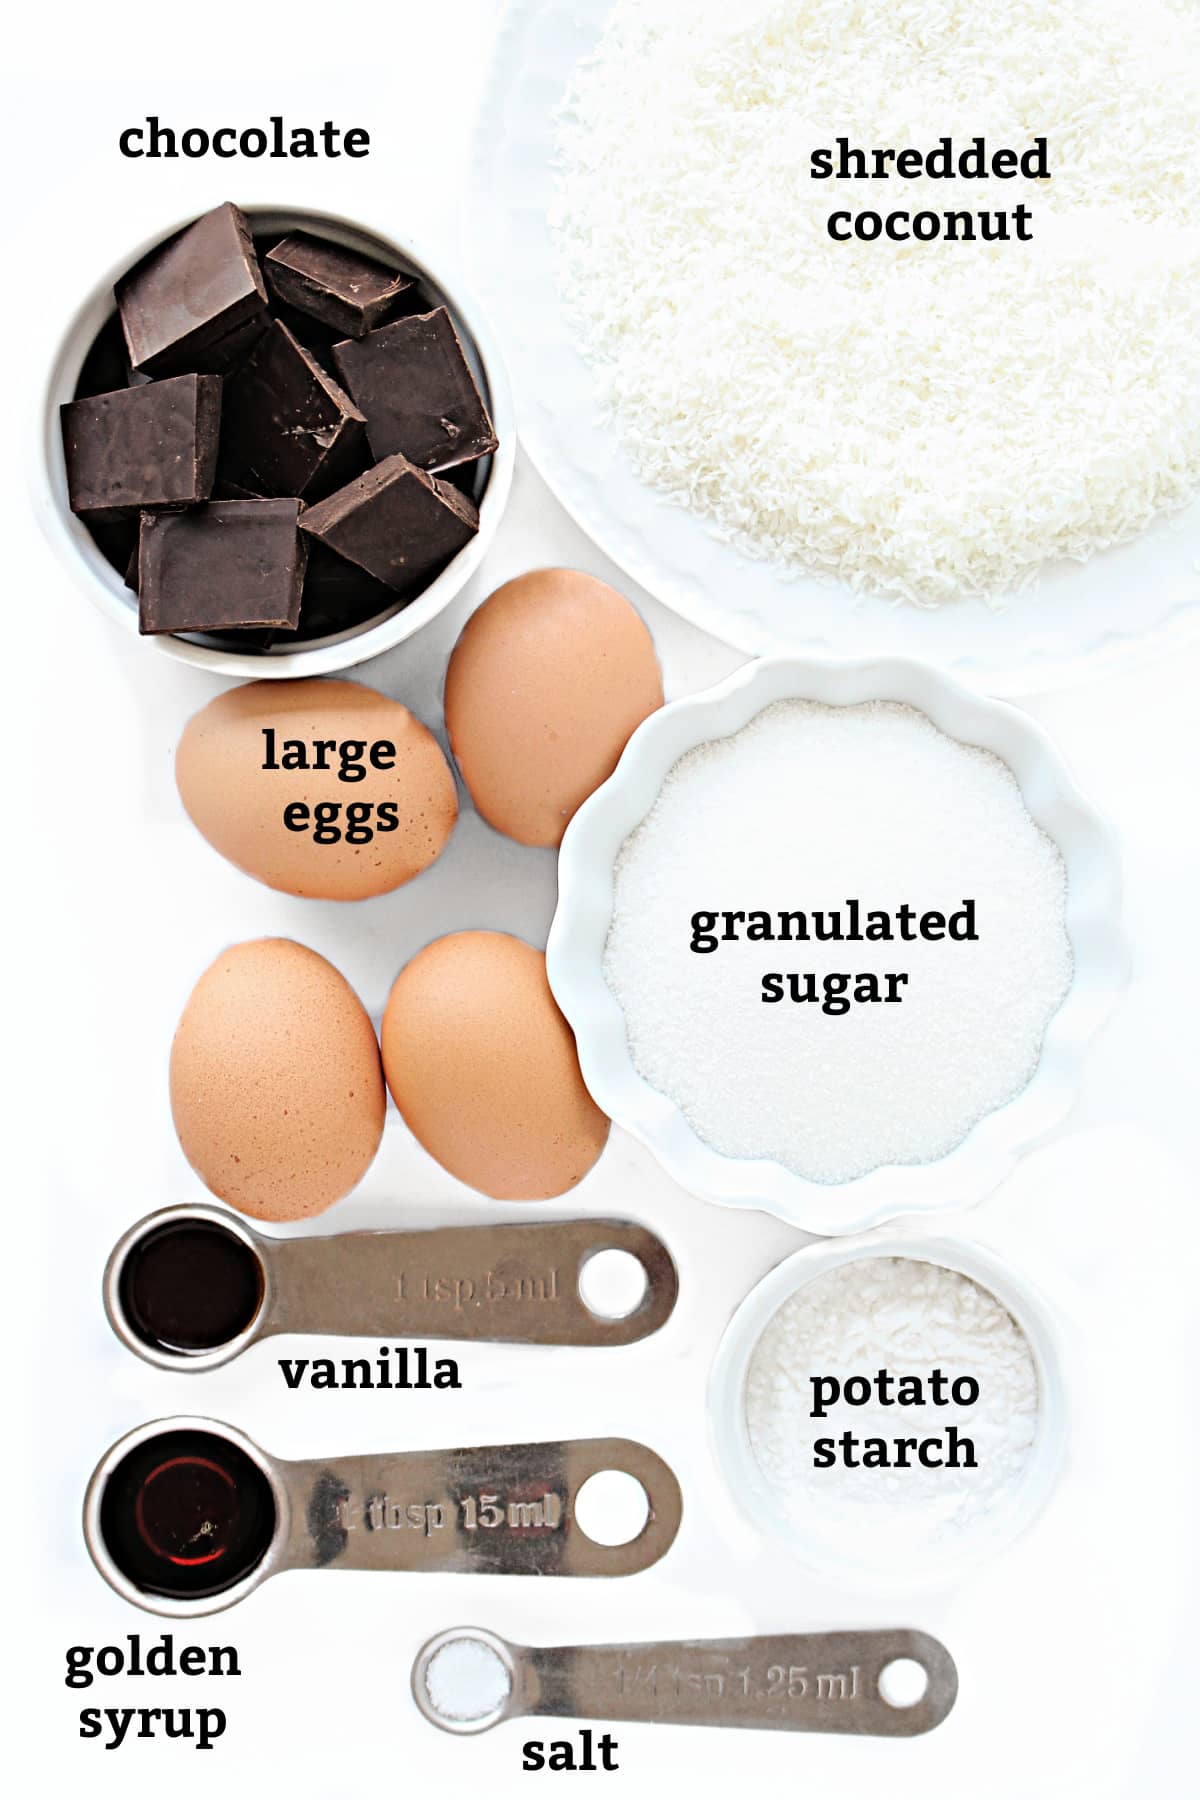 Ingredients labeled; chocolate, shredded coconut, large eggs, granulated sugar, vanilla, potato starch, golden syrup, salt.